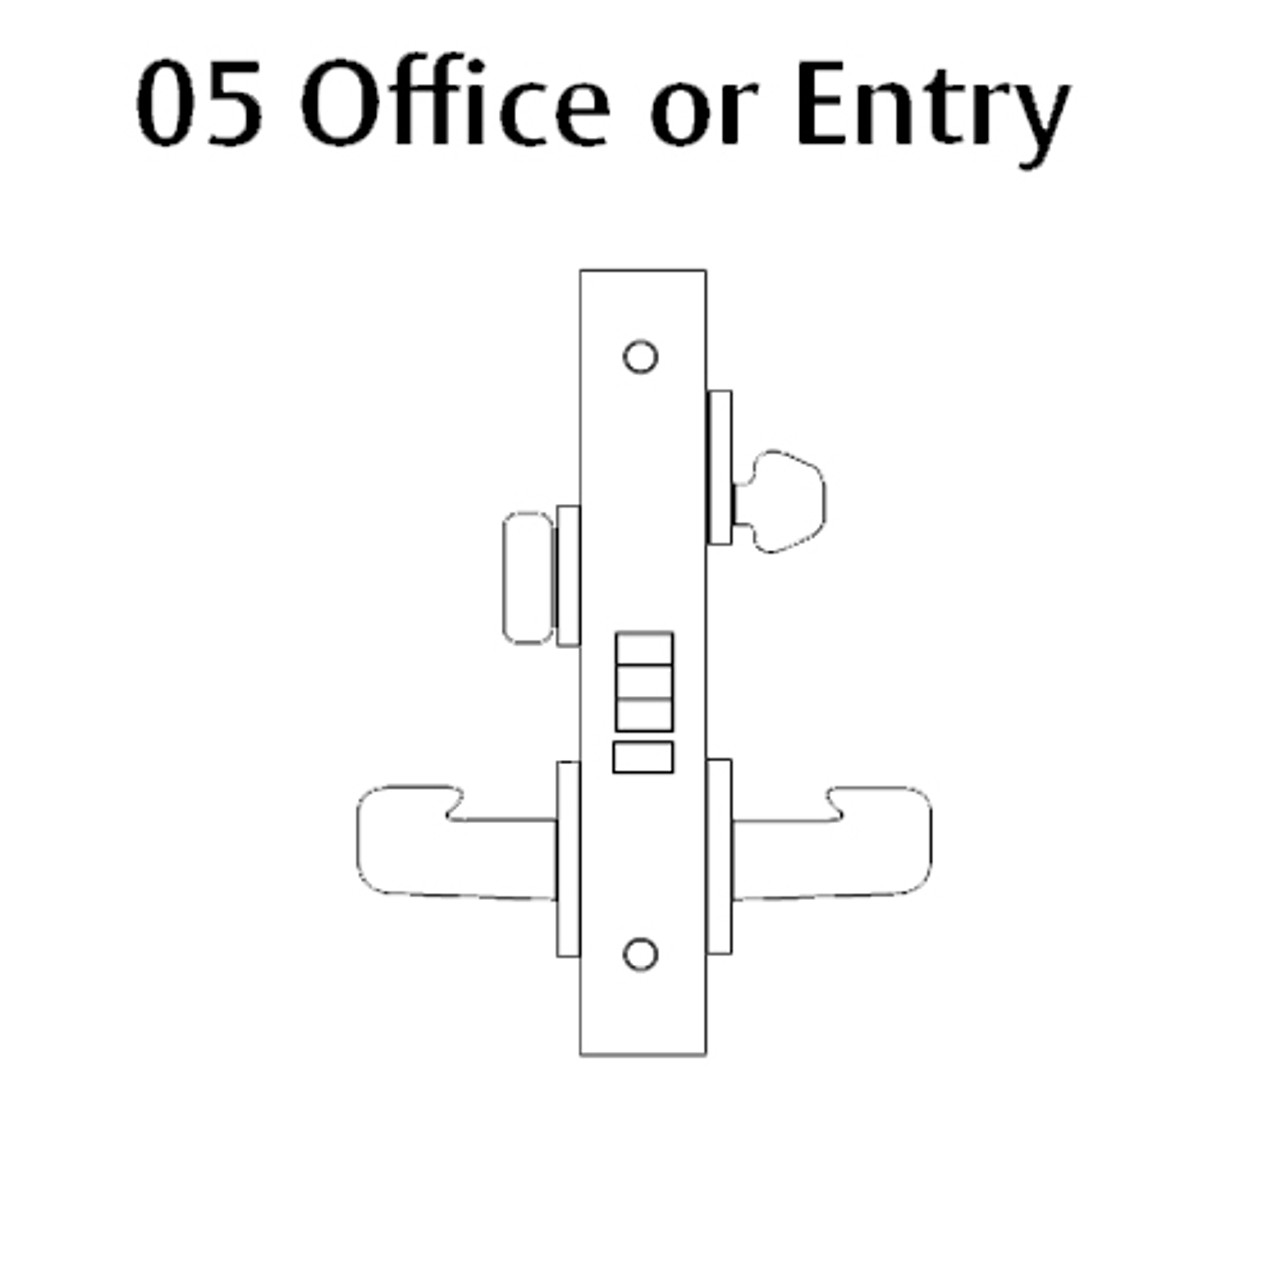 8205-LNW-10B Sargent 8200 Series Office or Entry Mortise Lock with LNW Lever Trim in Oxidized Dull Bronze